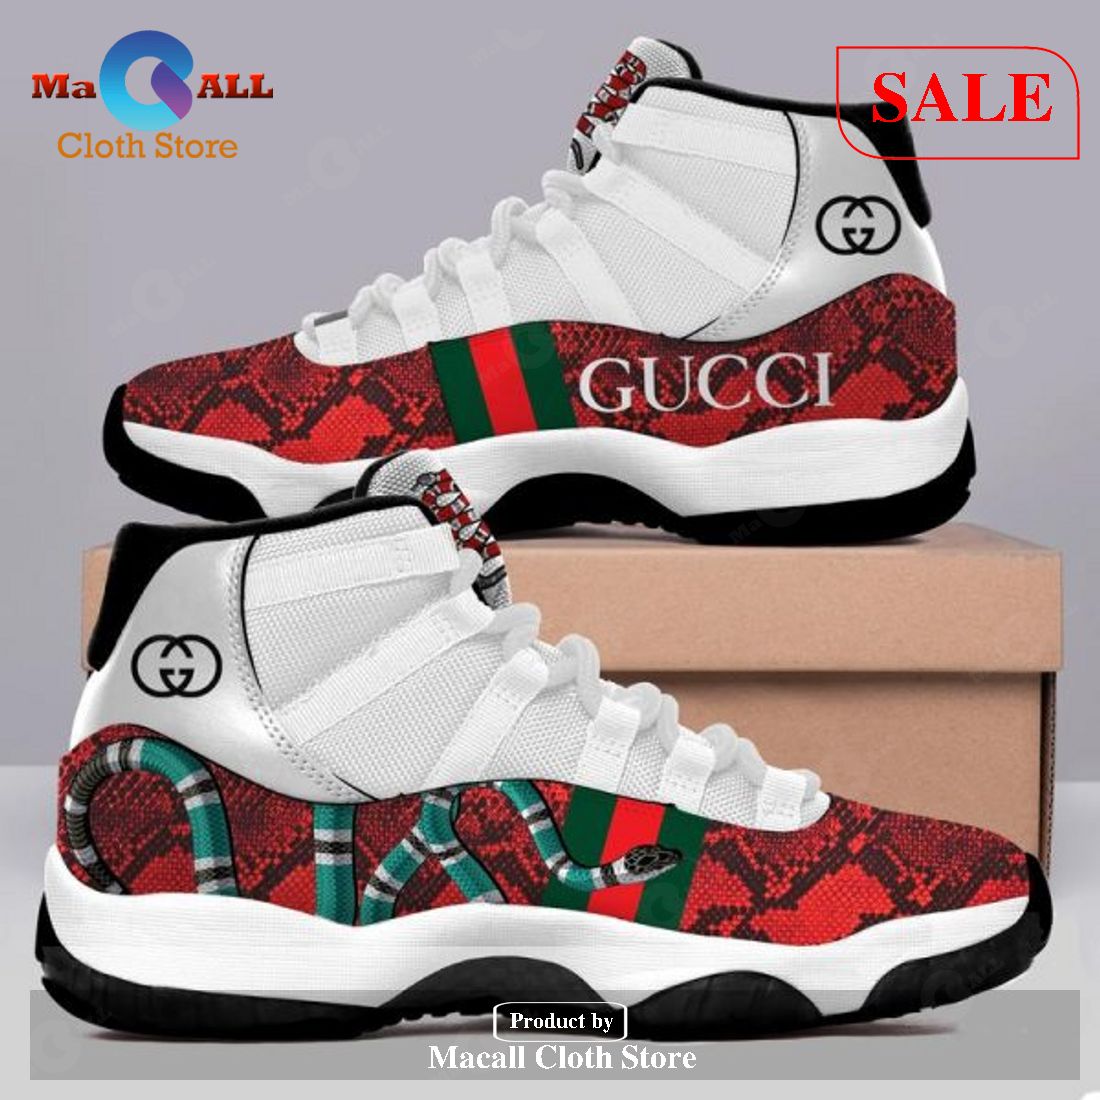 SALE] Gucci Brand Snake Air Jordan 11 Shoes Gucci Sneakers Gifts For Men  Women POD Design - Macall Cloth Store - Destination for fashionistas